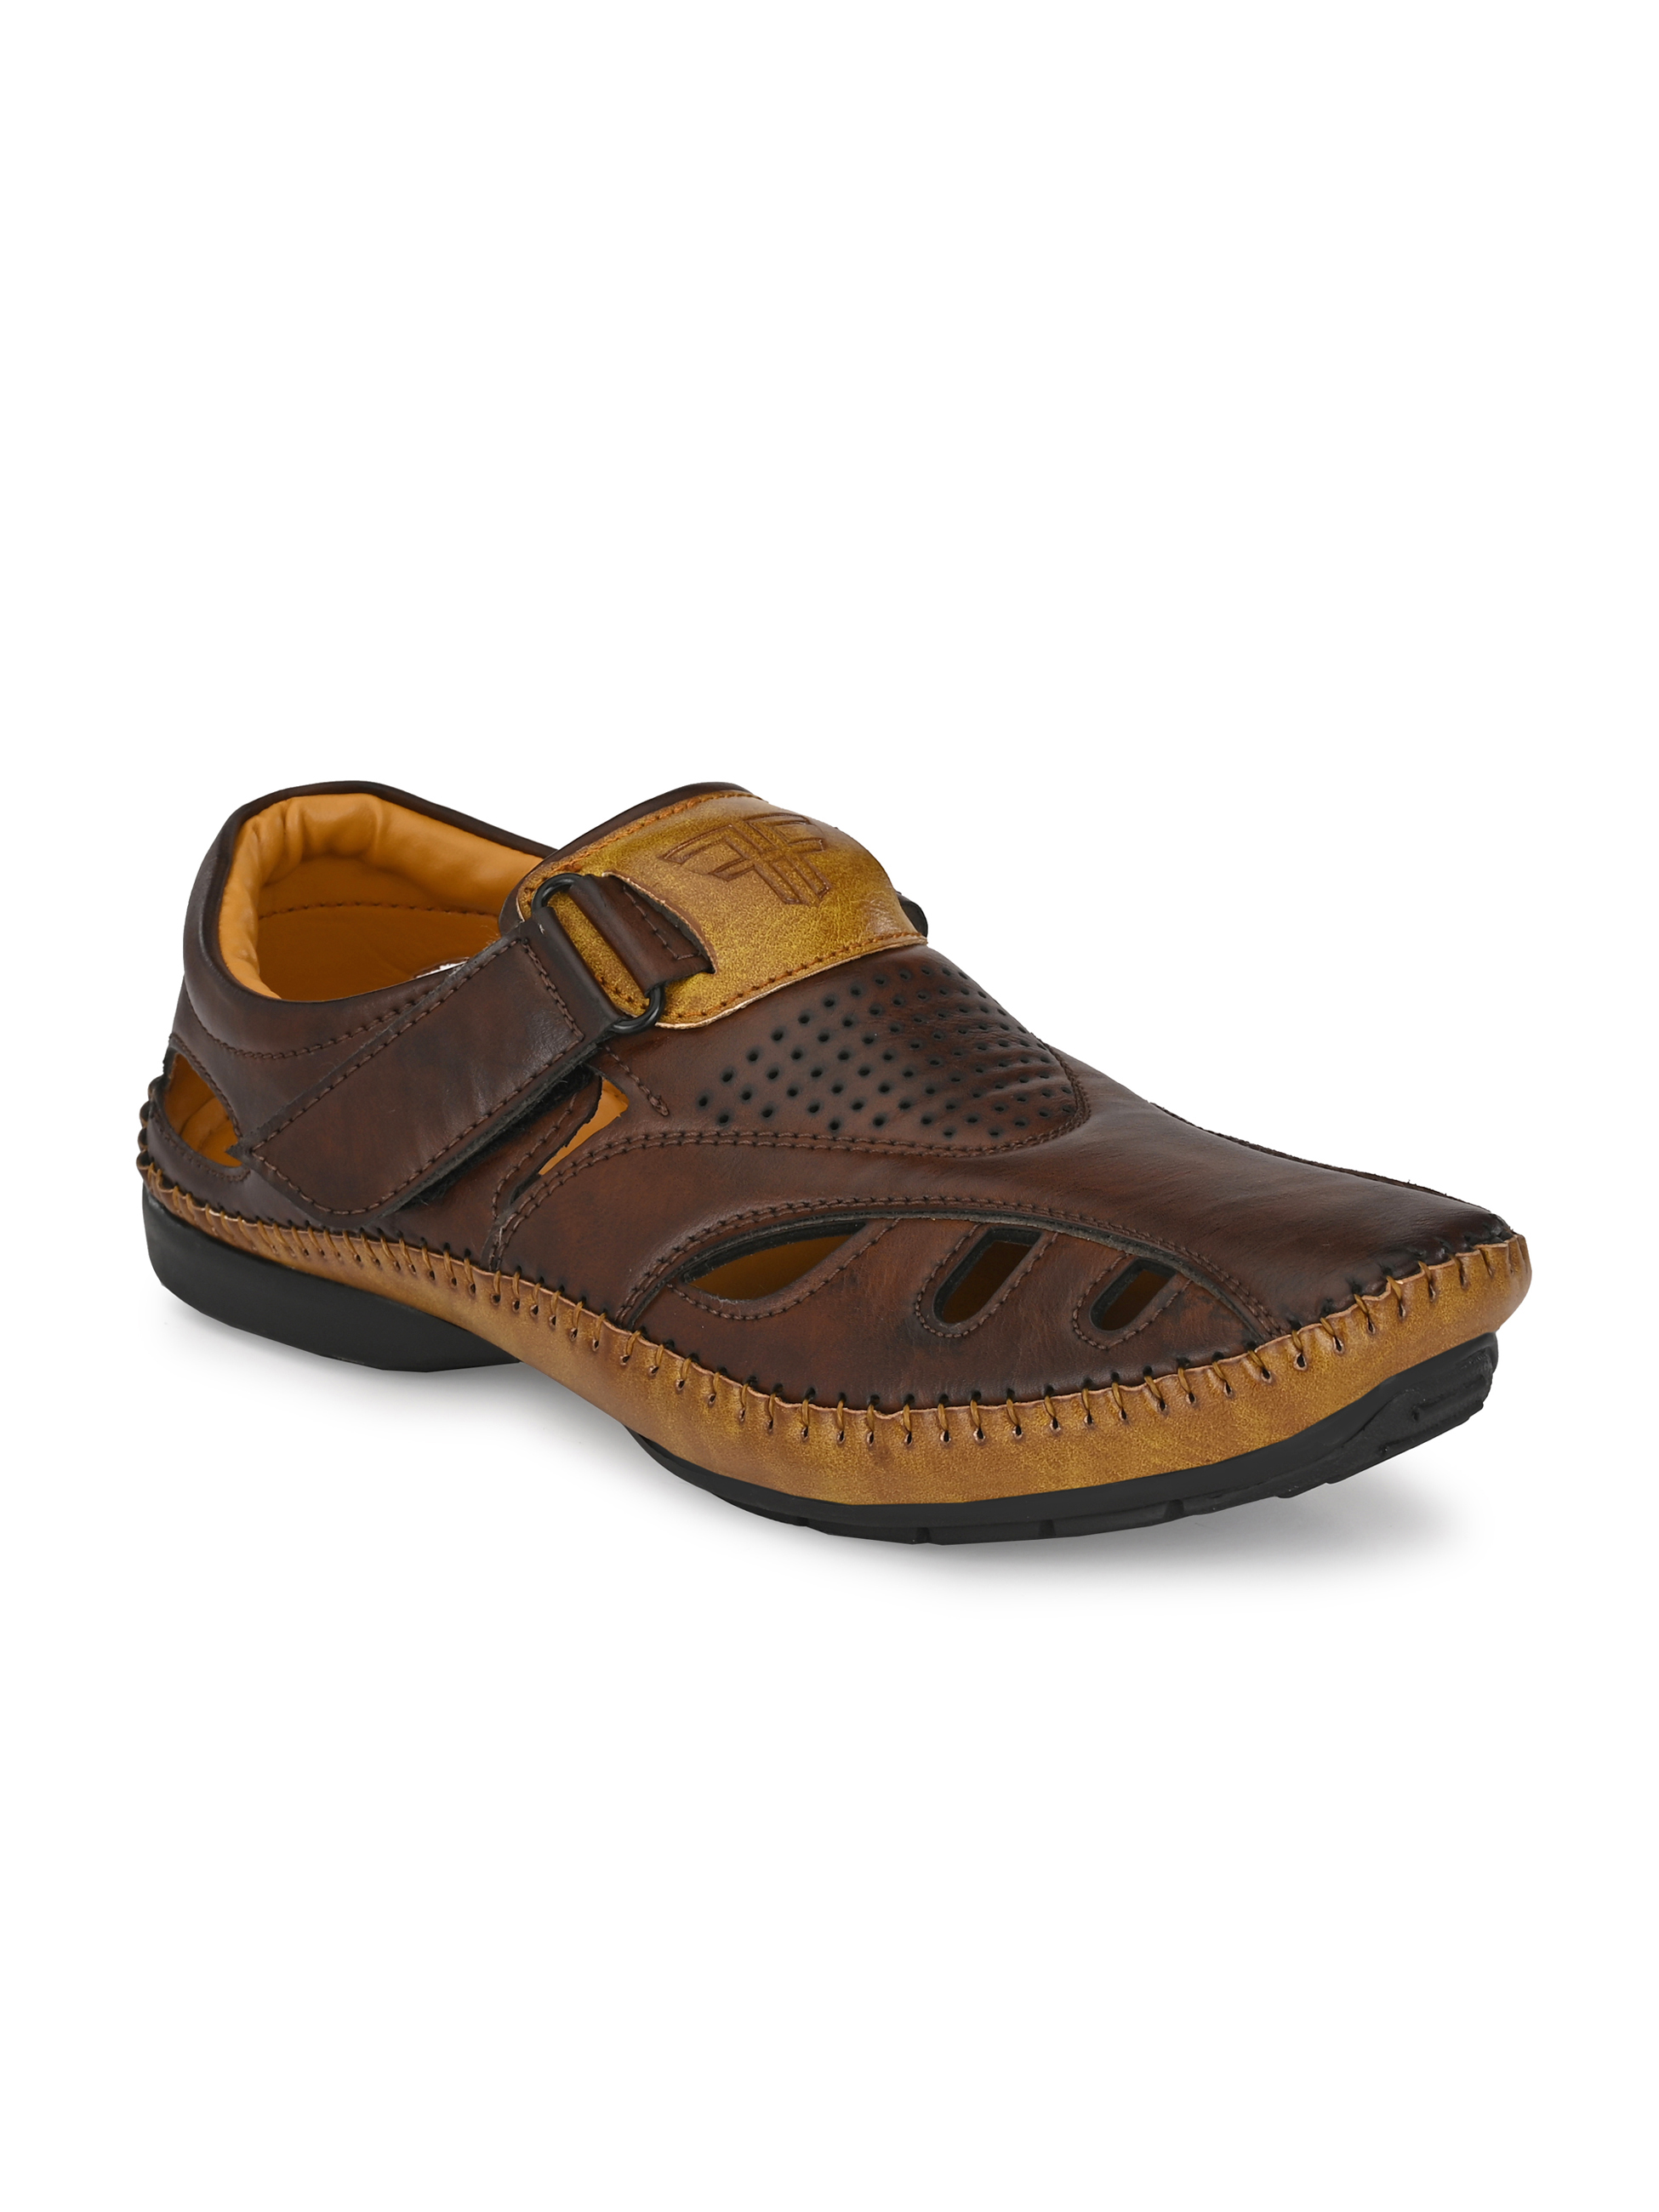 Buy Absolutee Shoes Brown Casual Floaters Fisherman Sandals Online ...